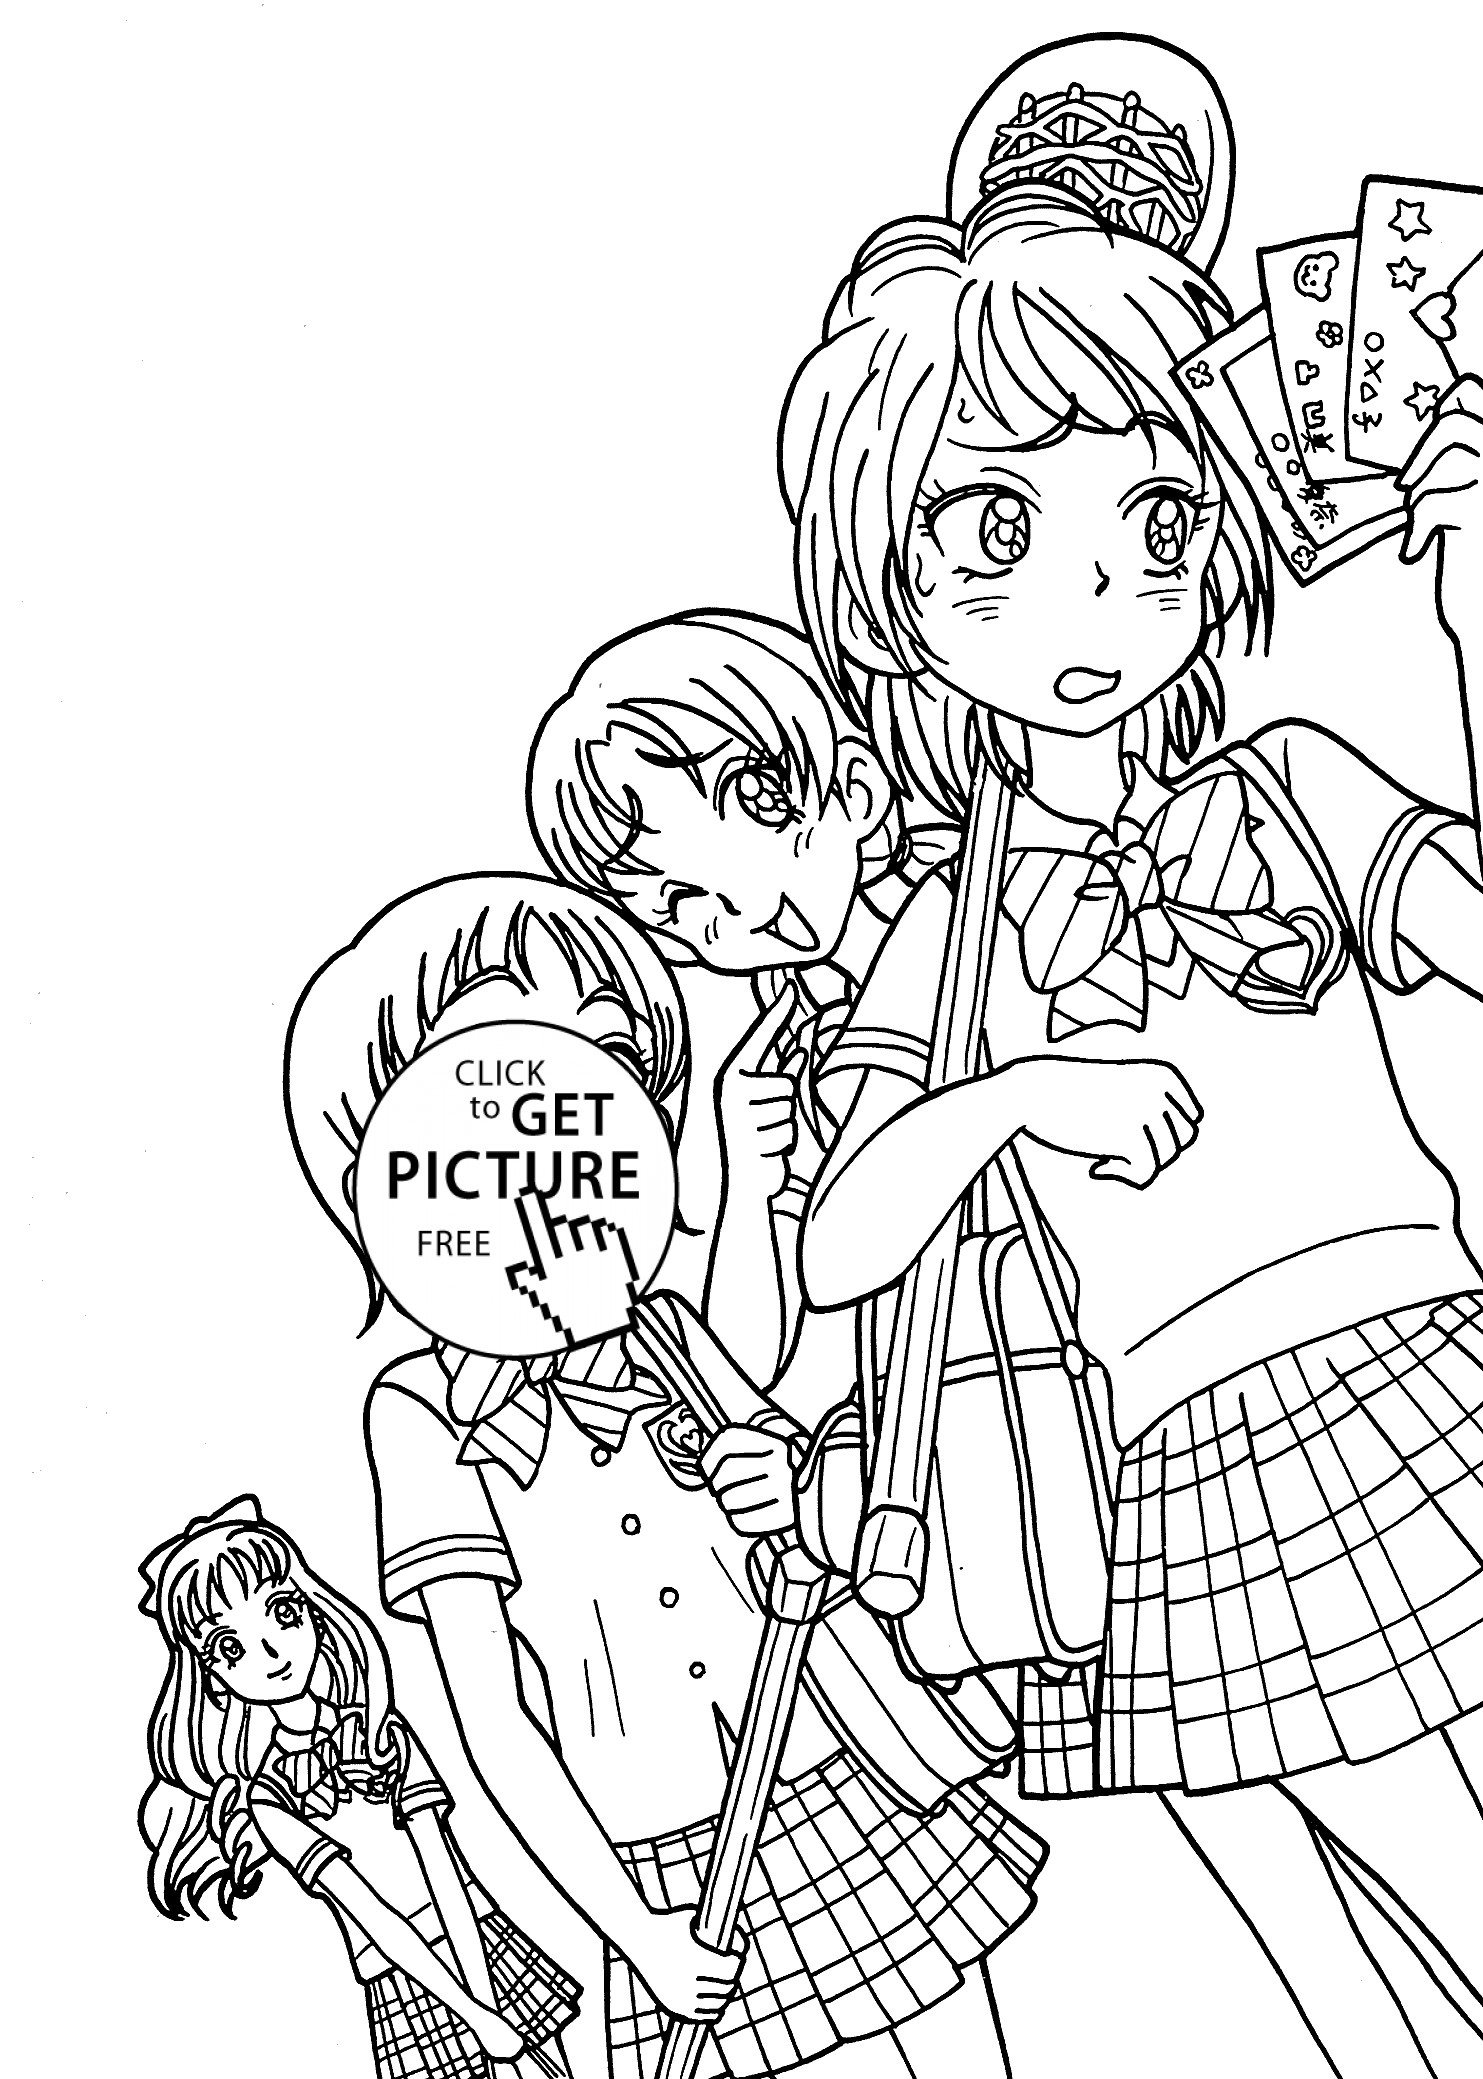 Anime Coloring Pages For Girls
 Girls from Pretty cure anime coloring pages for kids